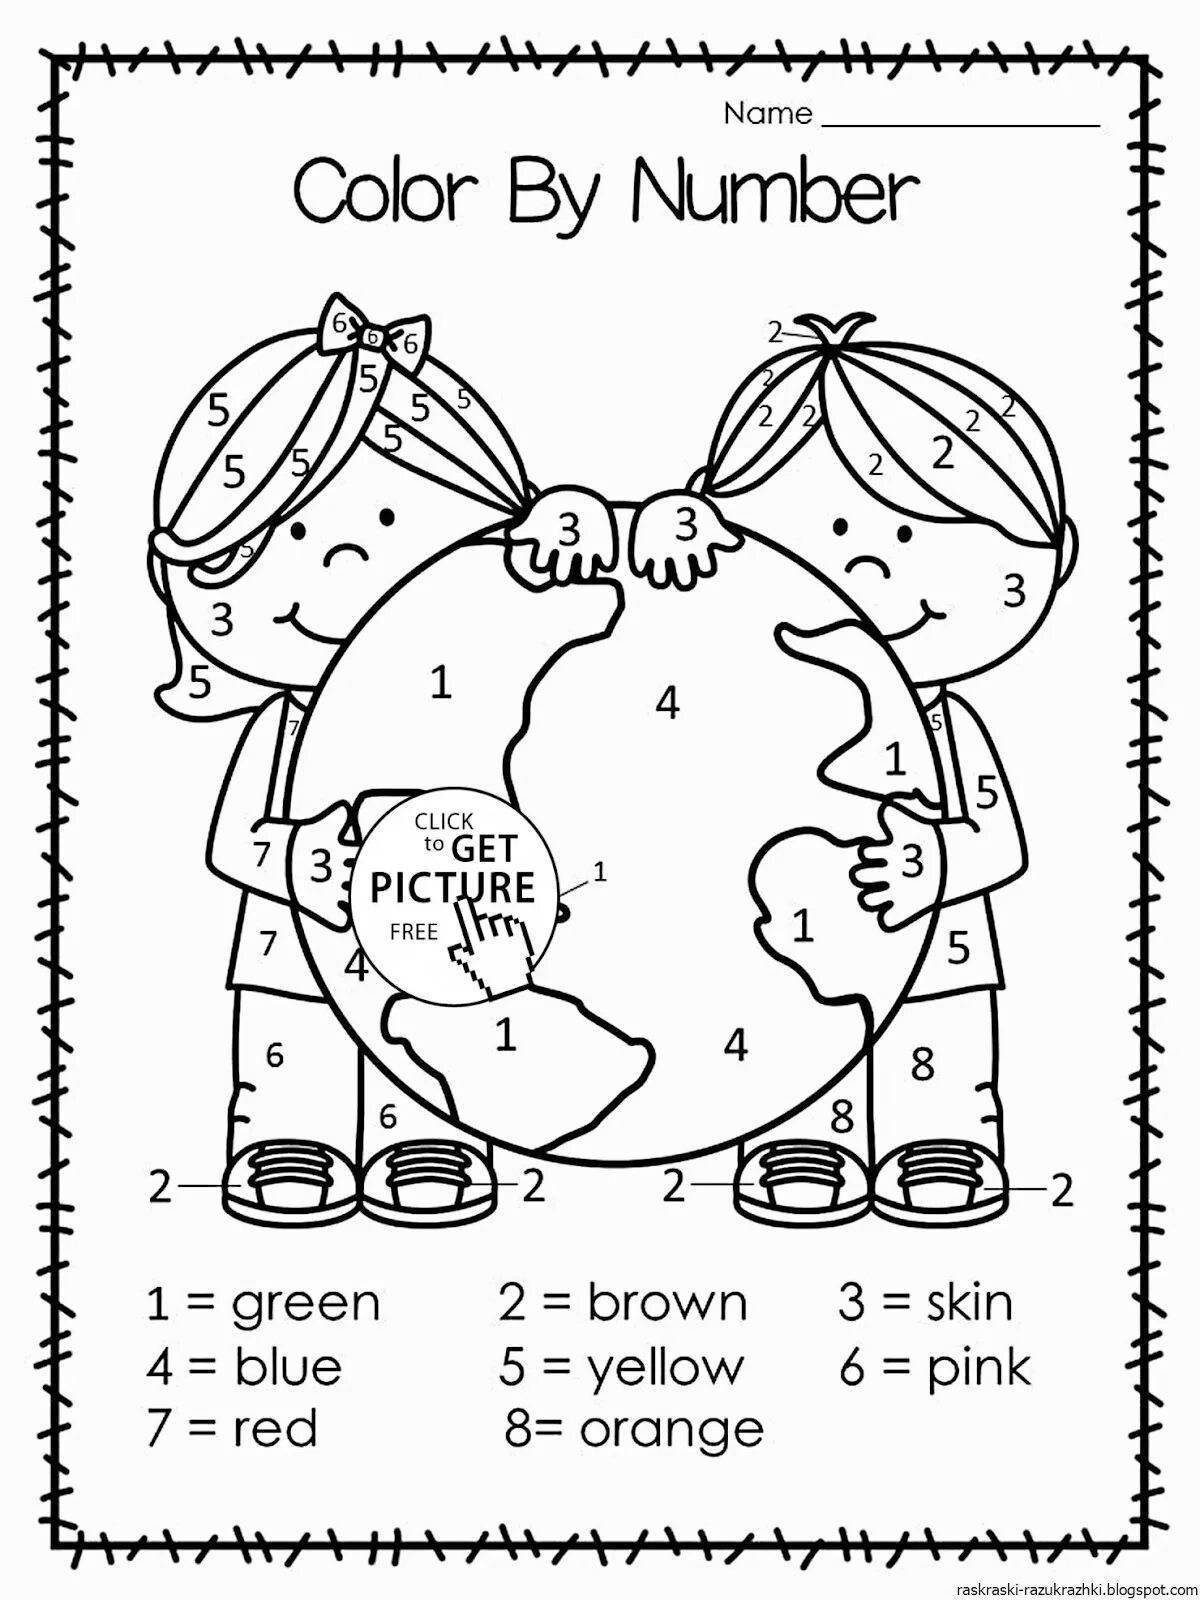 Colorful English coloring book with tasks for grade 4